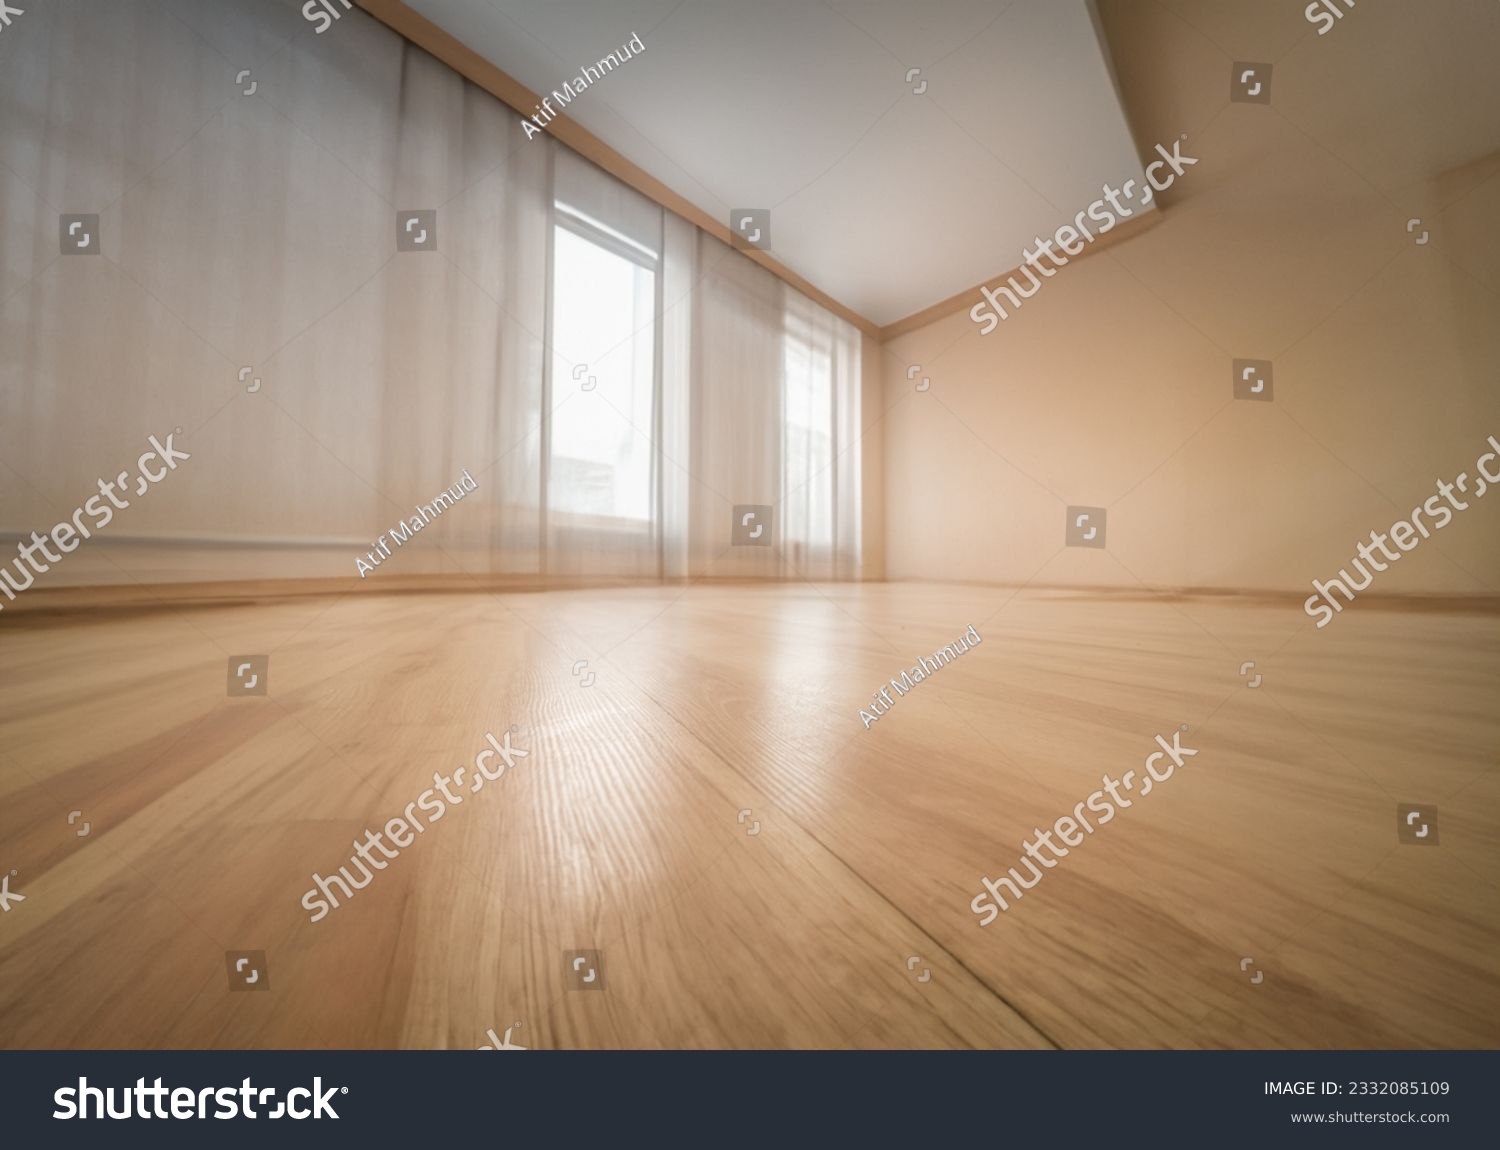 Empty wooden floor closeup and room ceiling and doors with light reflection #2332085109